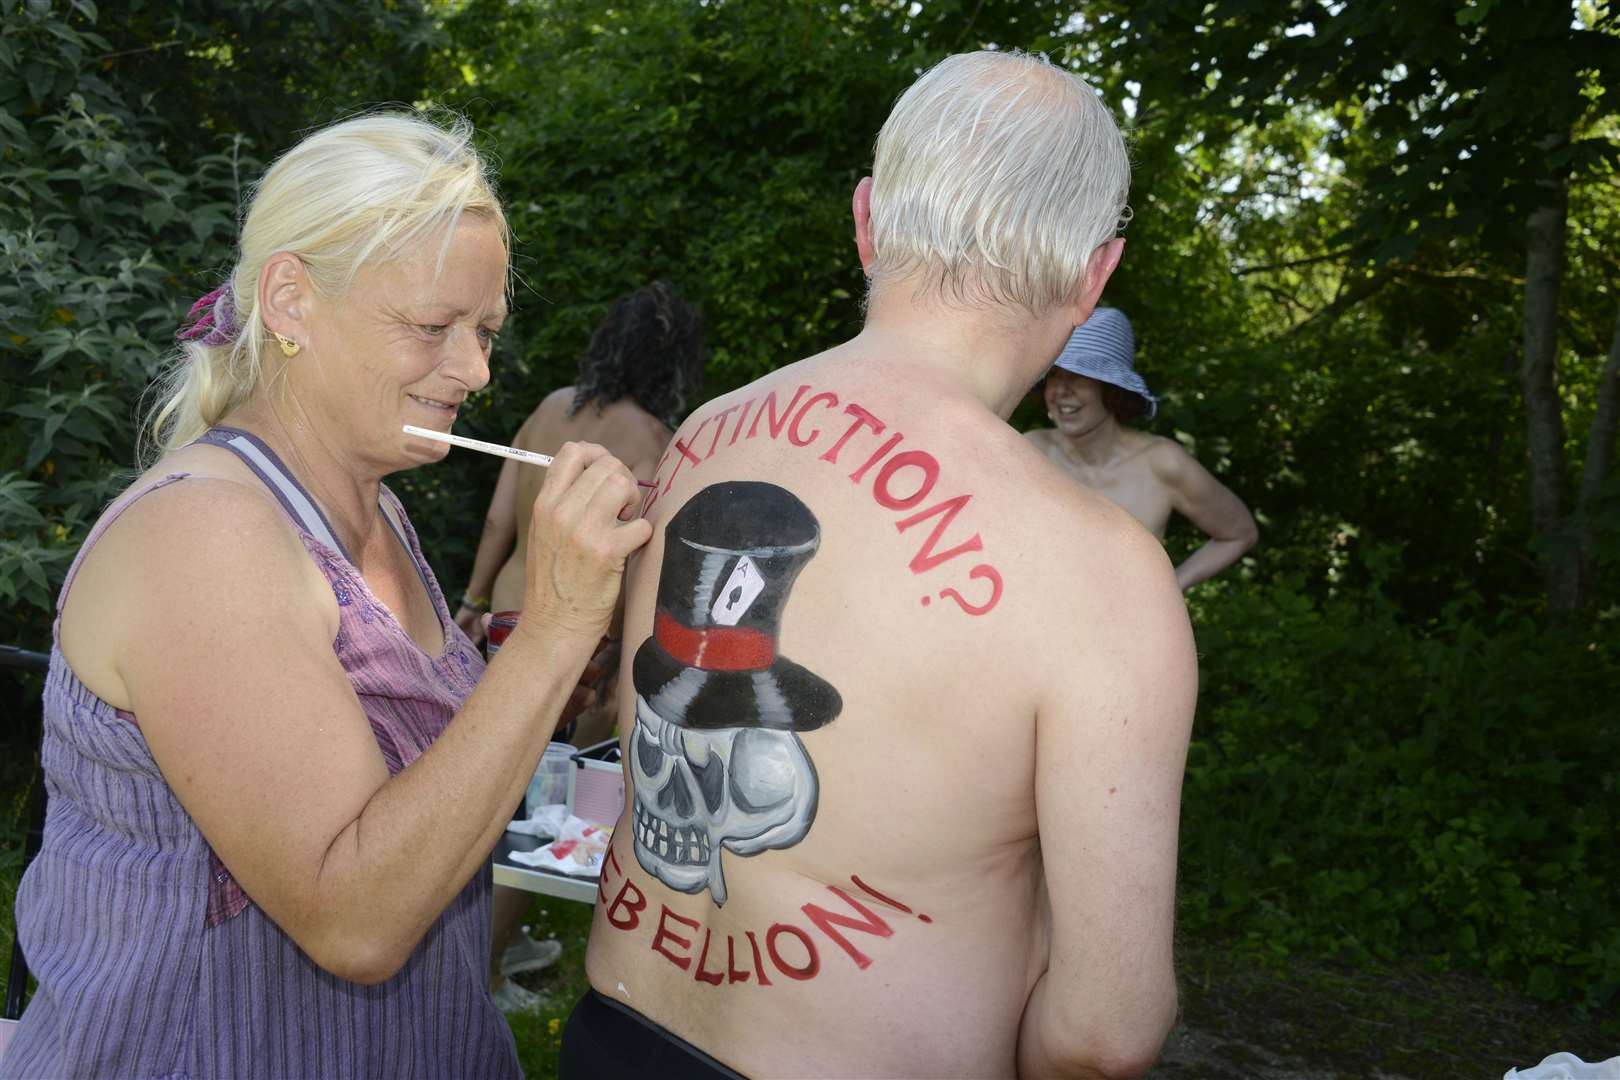 Cyclists used body paint to promote their message. Picture: Paul Amos